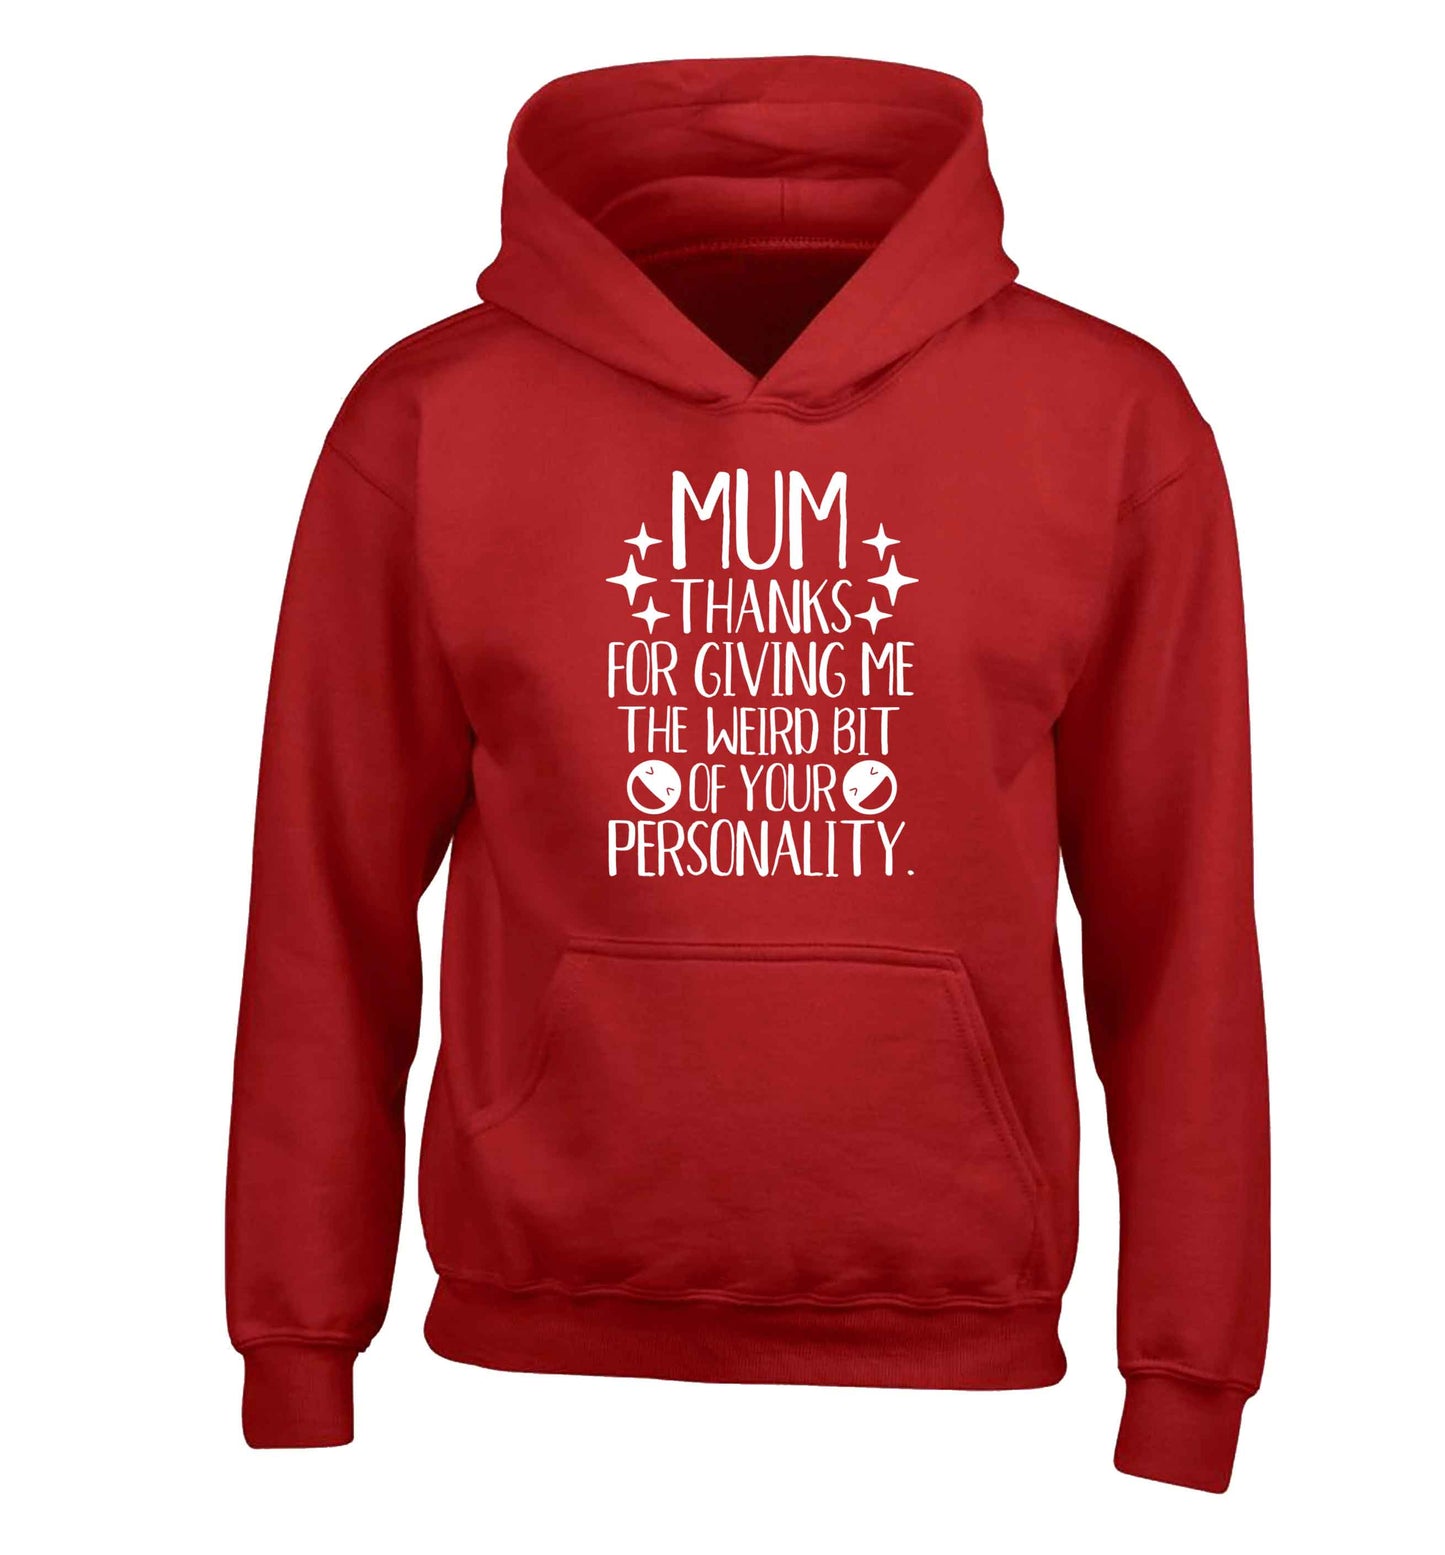 Mum, I love you more than halloumi and if you know me at all you know how deep that is children's red hoodie 12-13 Years